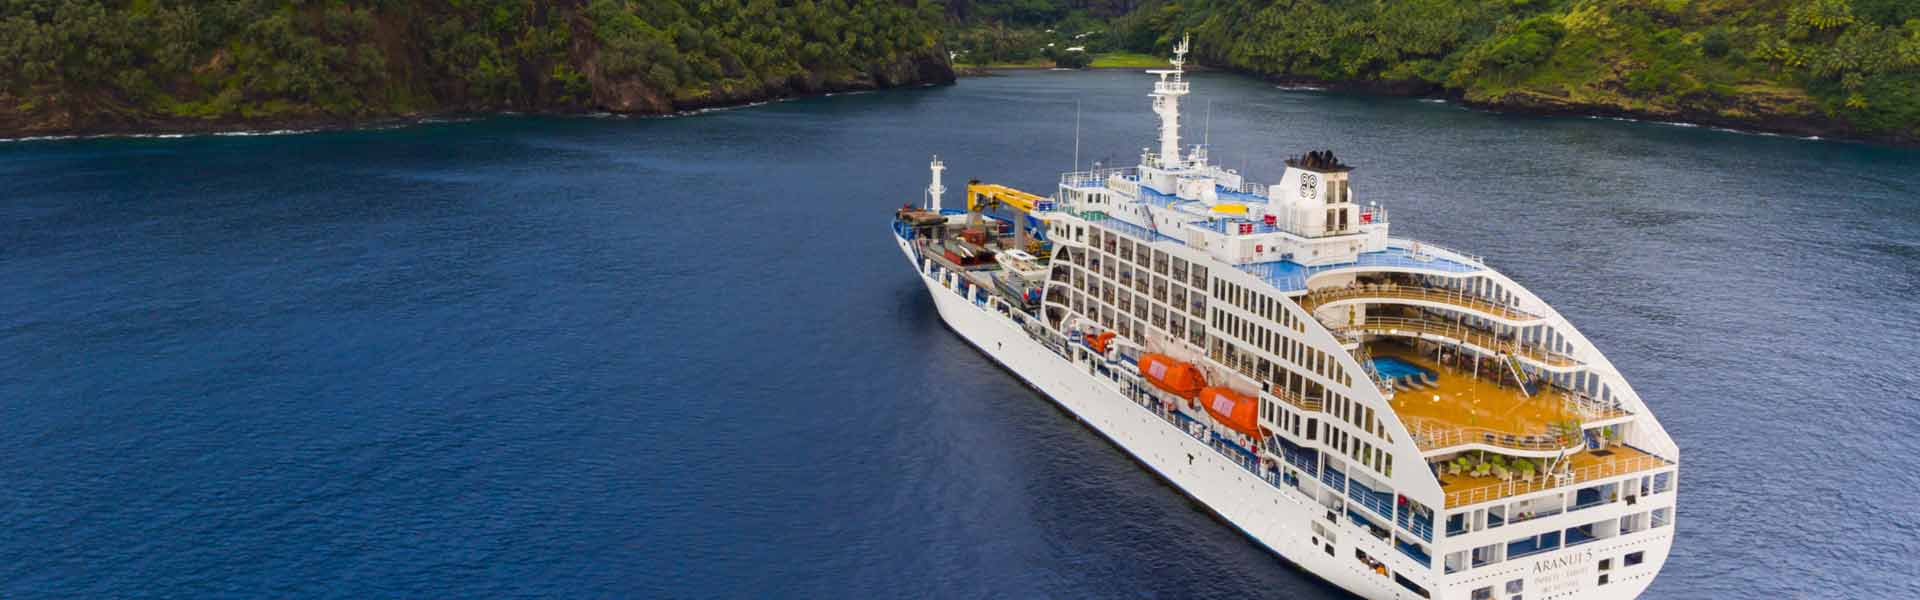 10 Nights’ Austral Islands Discovery Cruise w/ All Meals & More!